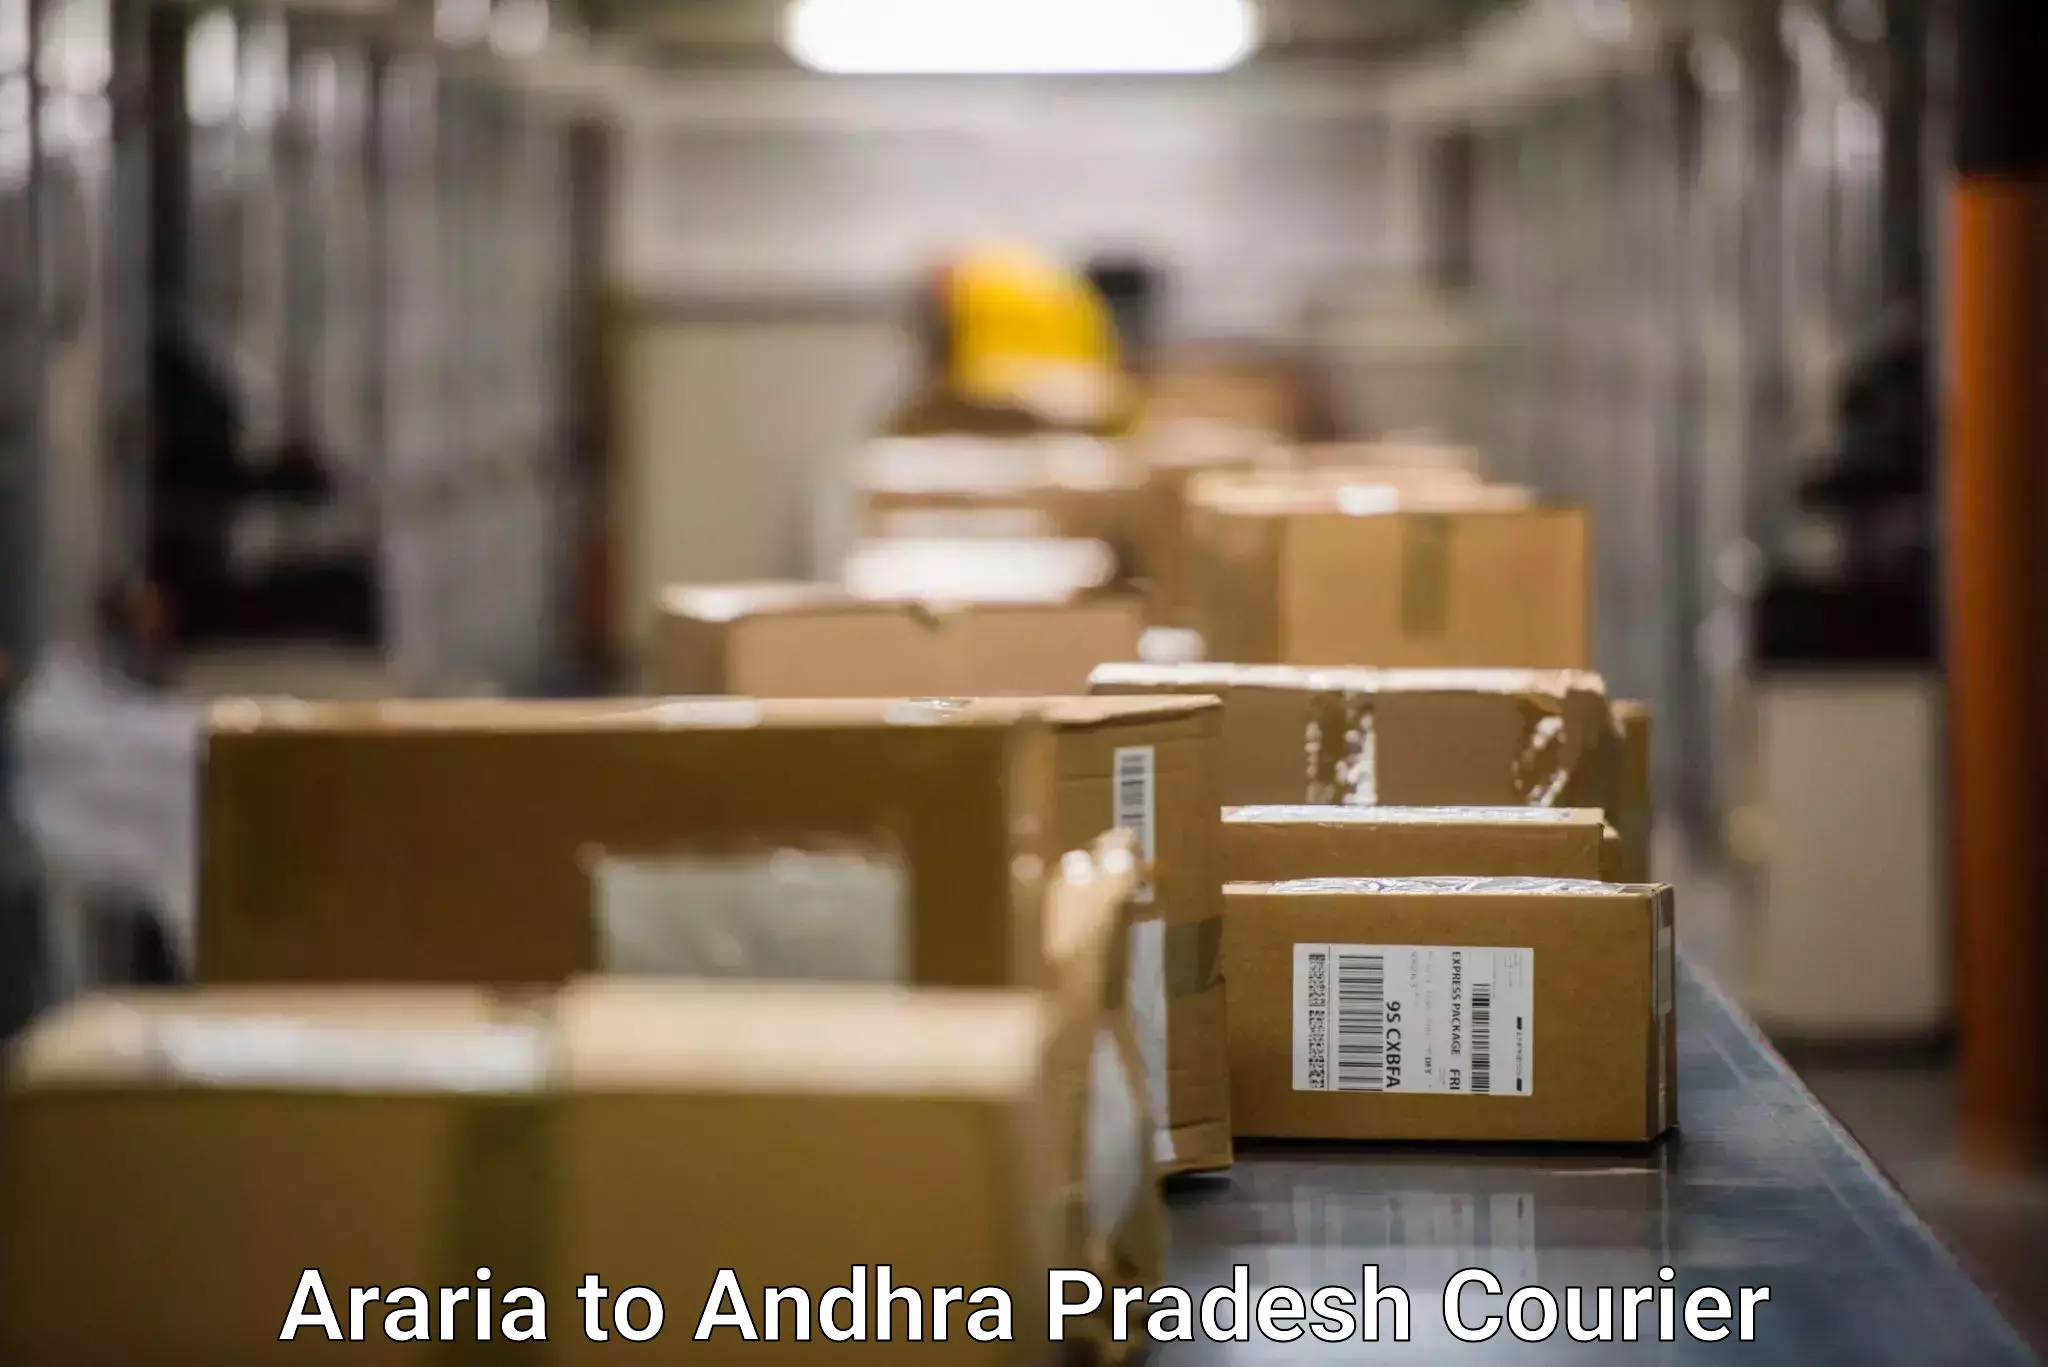 Subscription-based courier Araria to Etcherla